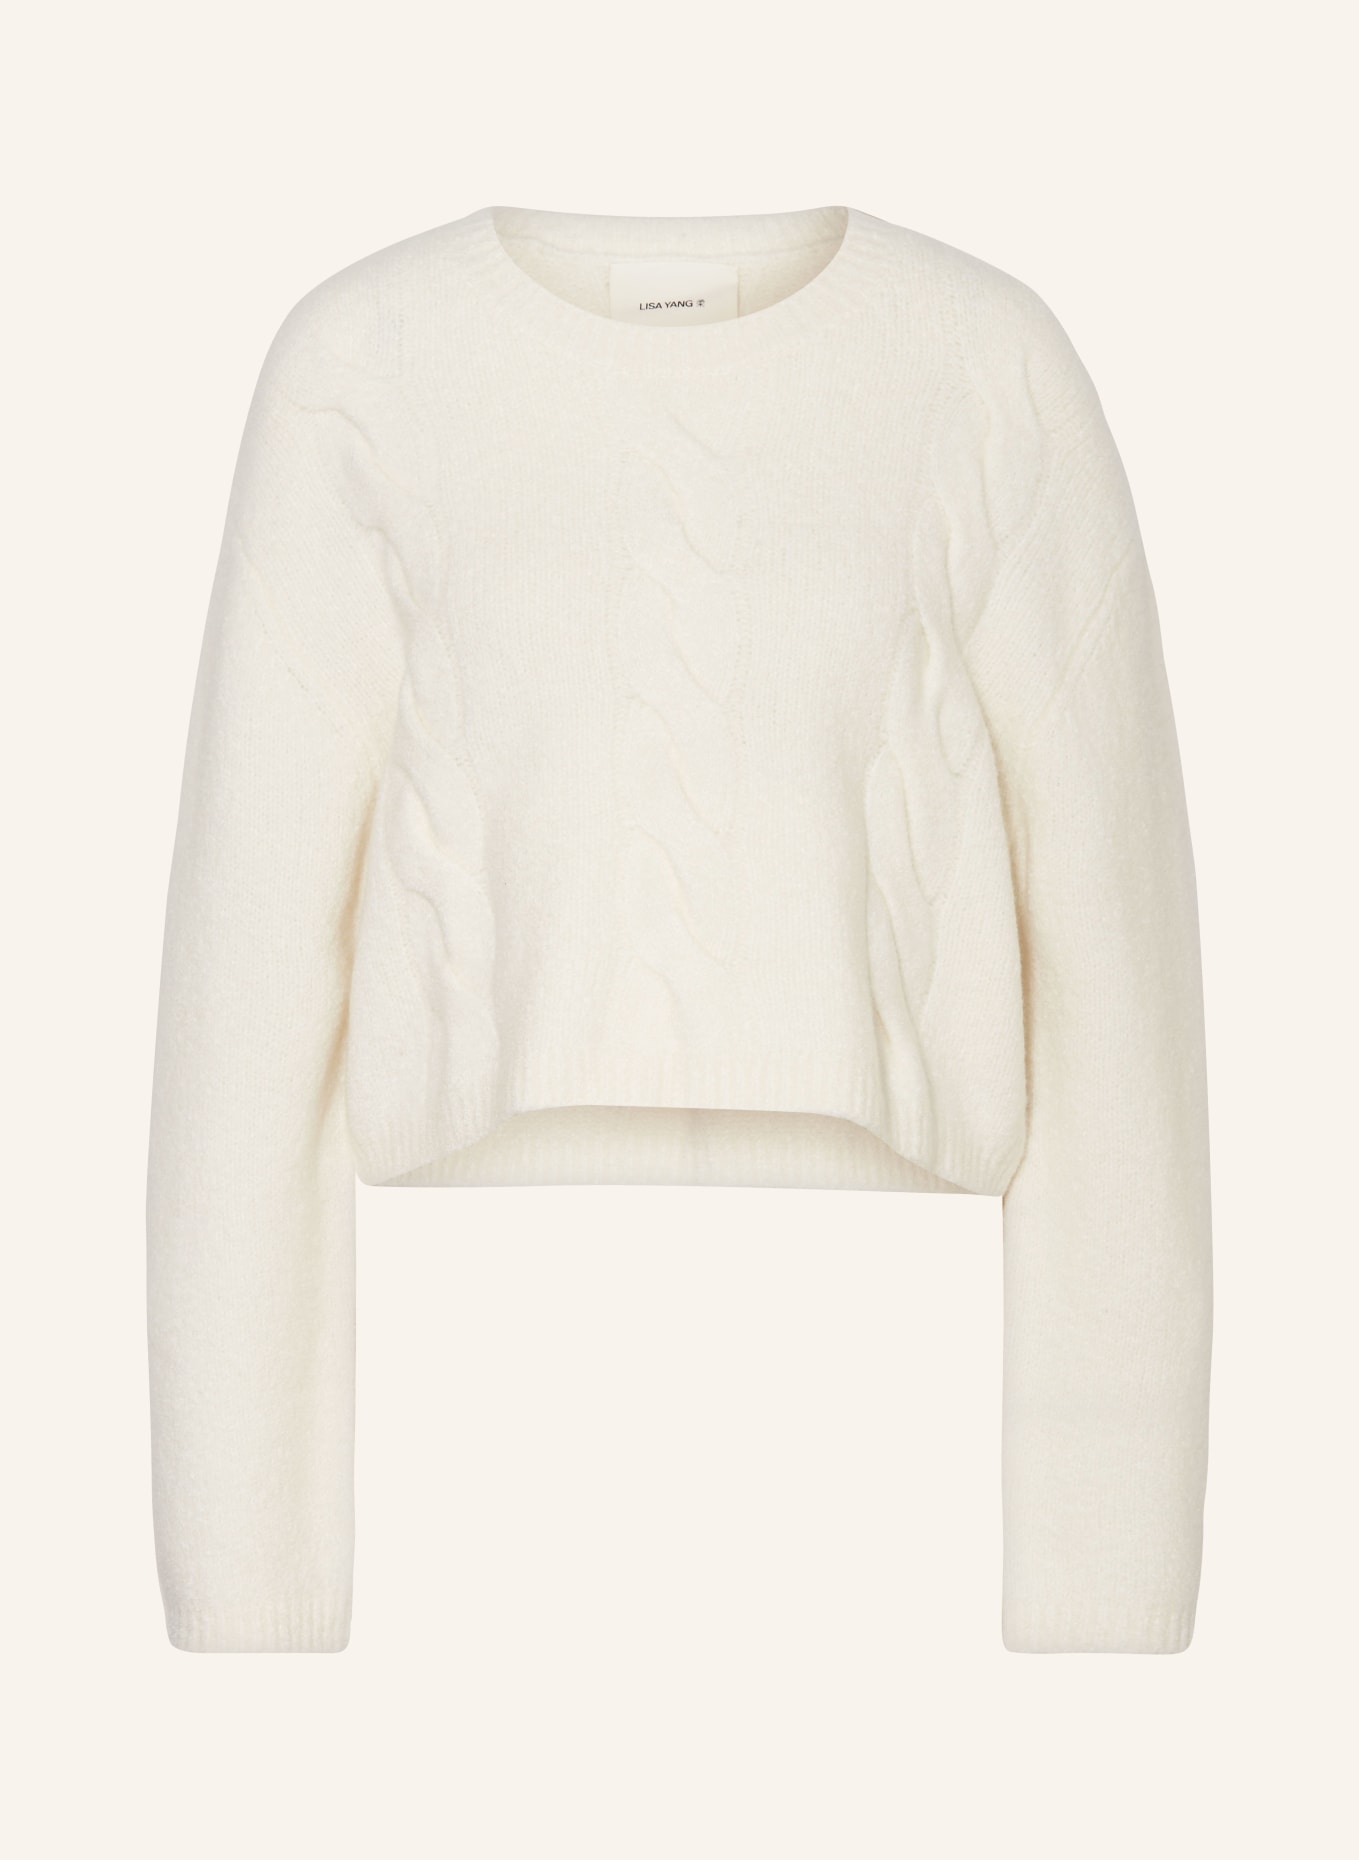 LISA YANG Cashmere sweater, Color: CREAM (Image 1)